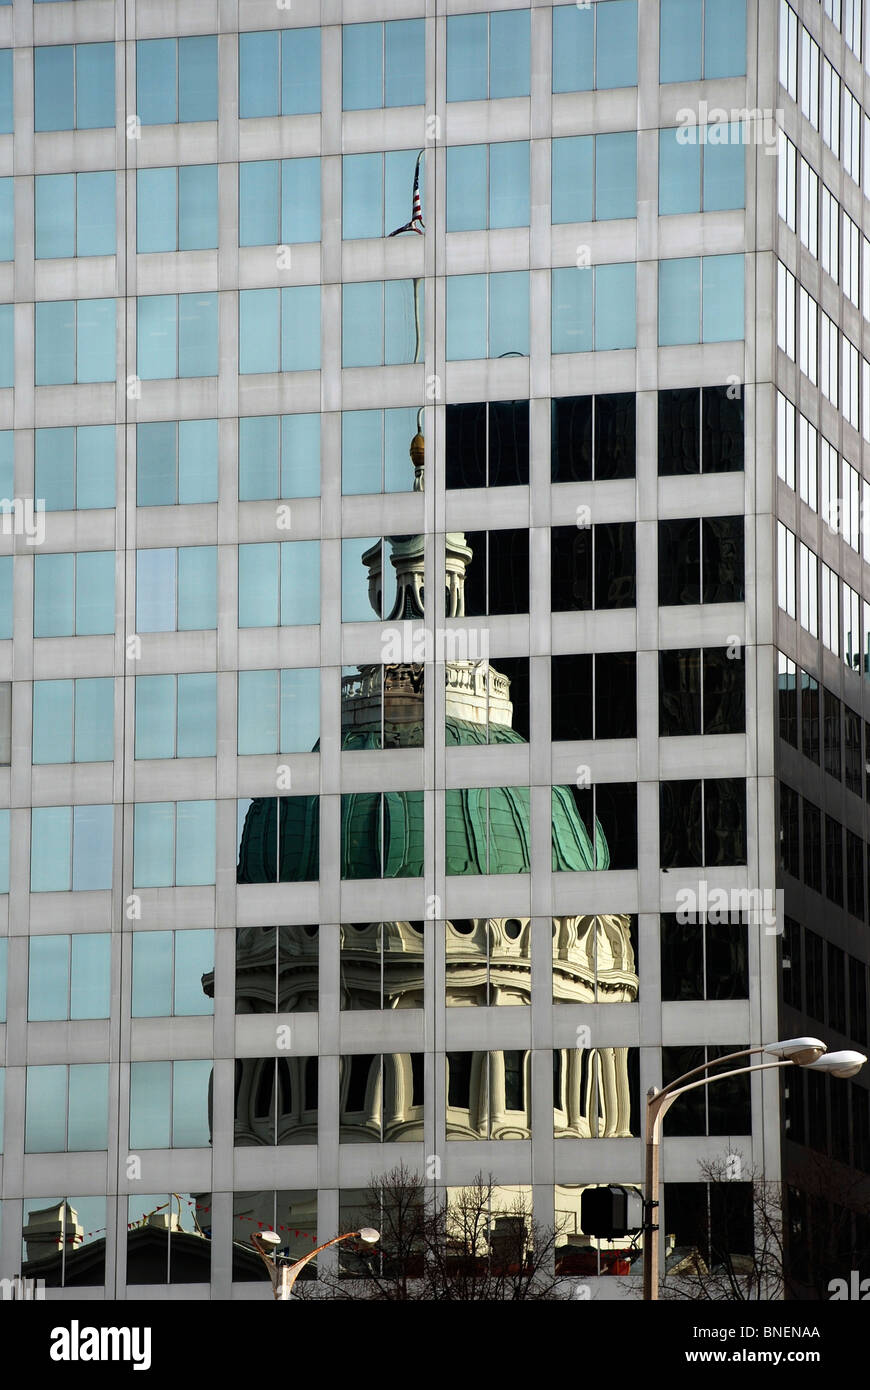 Reflection of Old Courthouse in St. Louis. Stock Photo